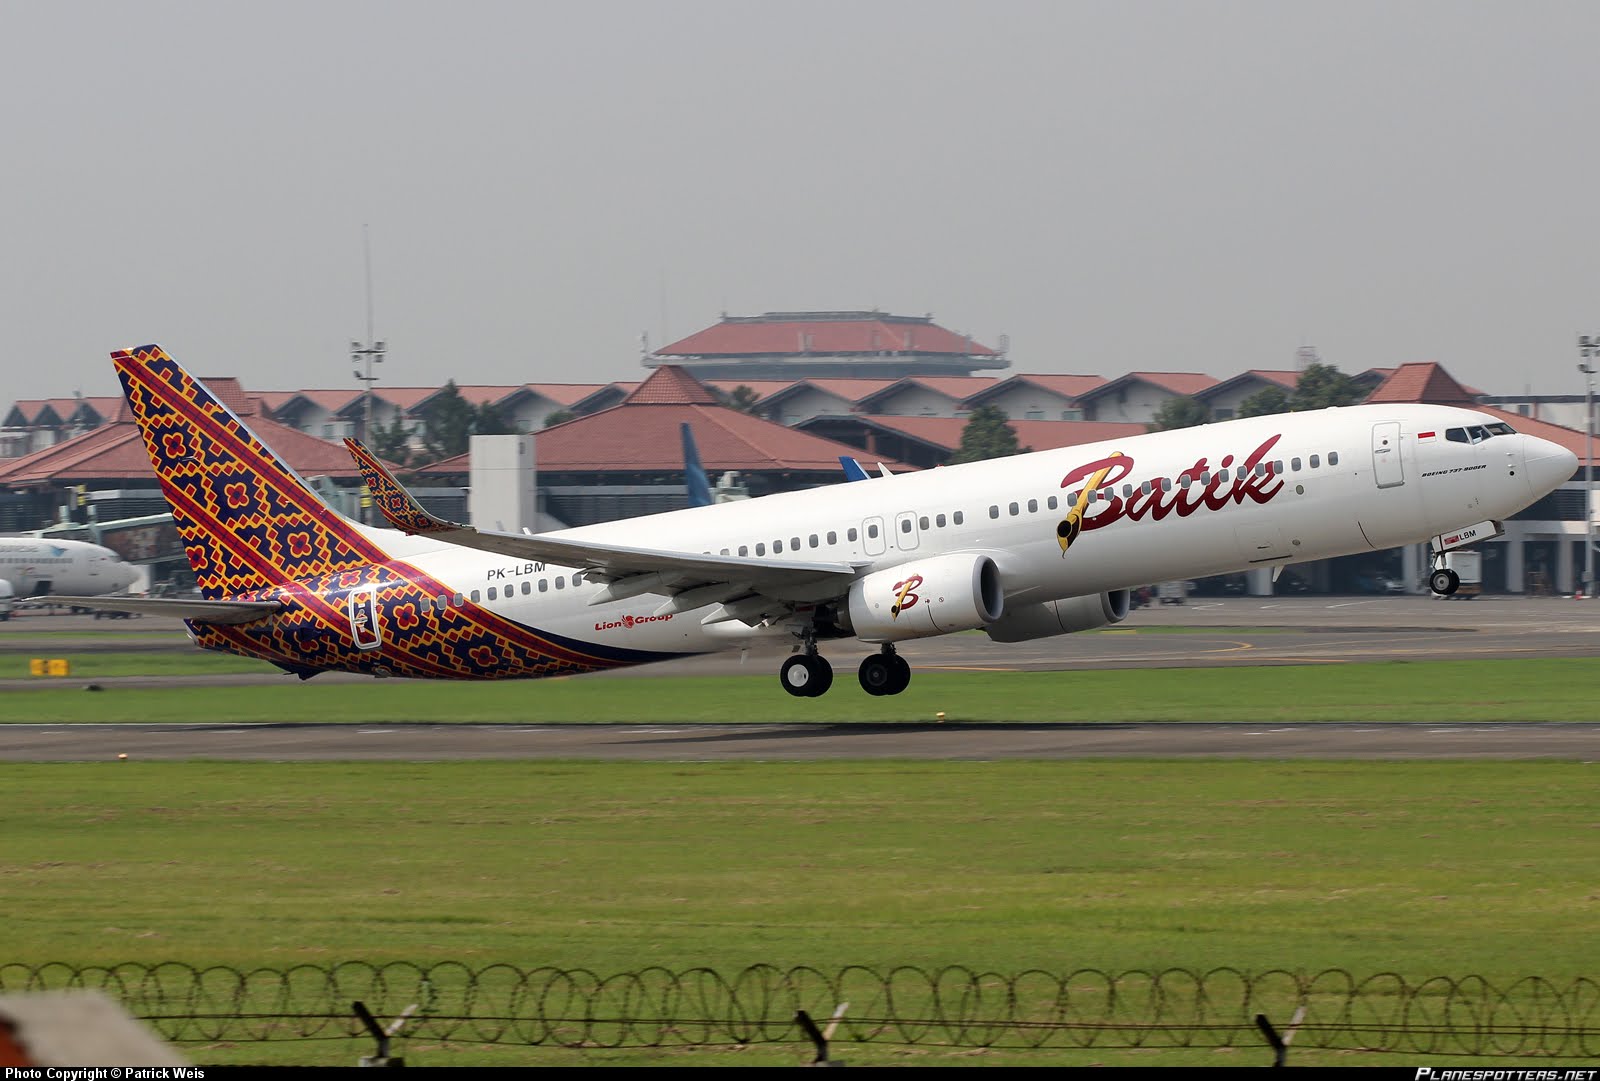 Tickets for flights in Indonesia